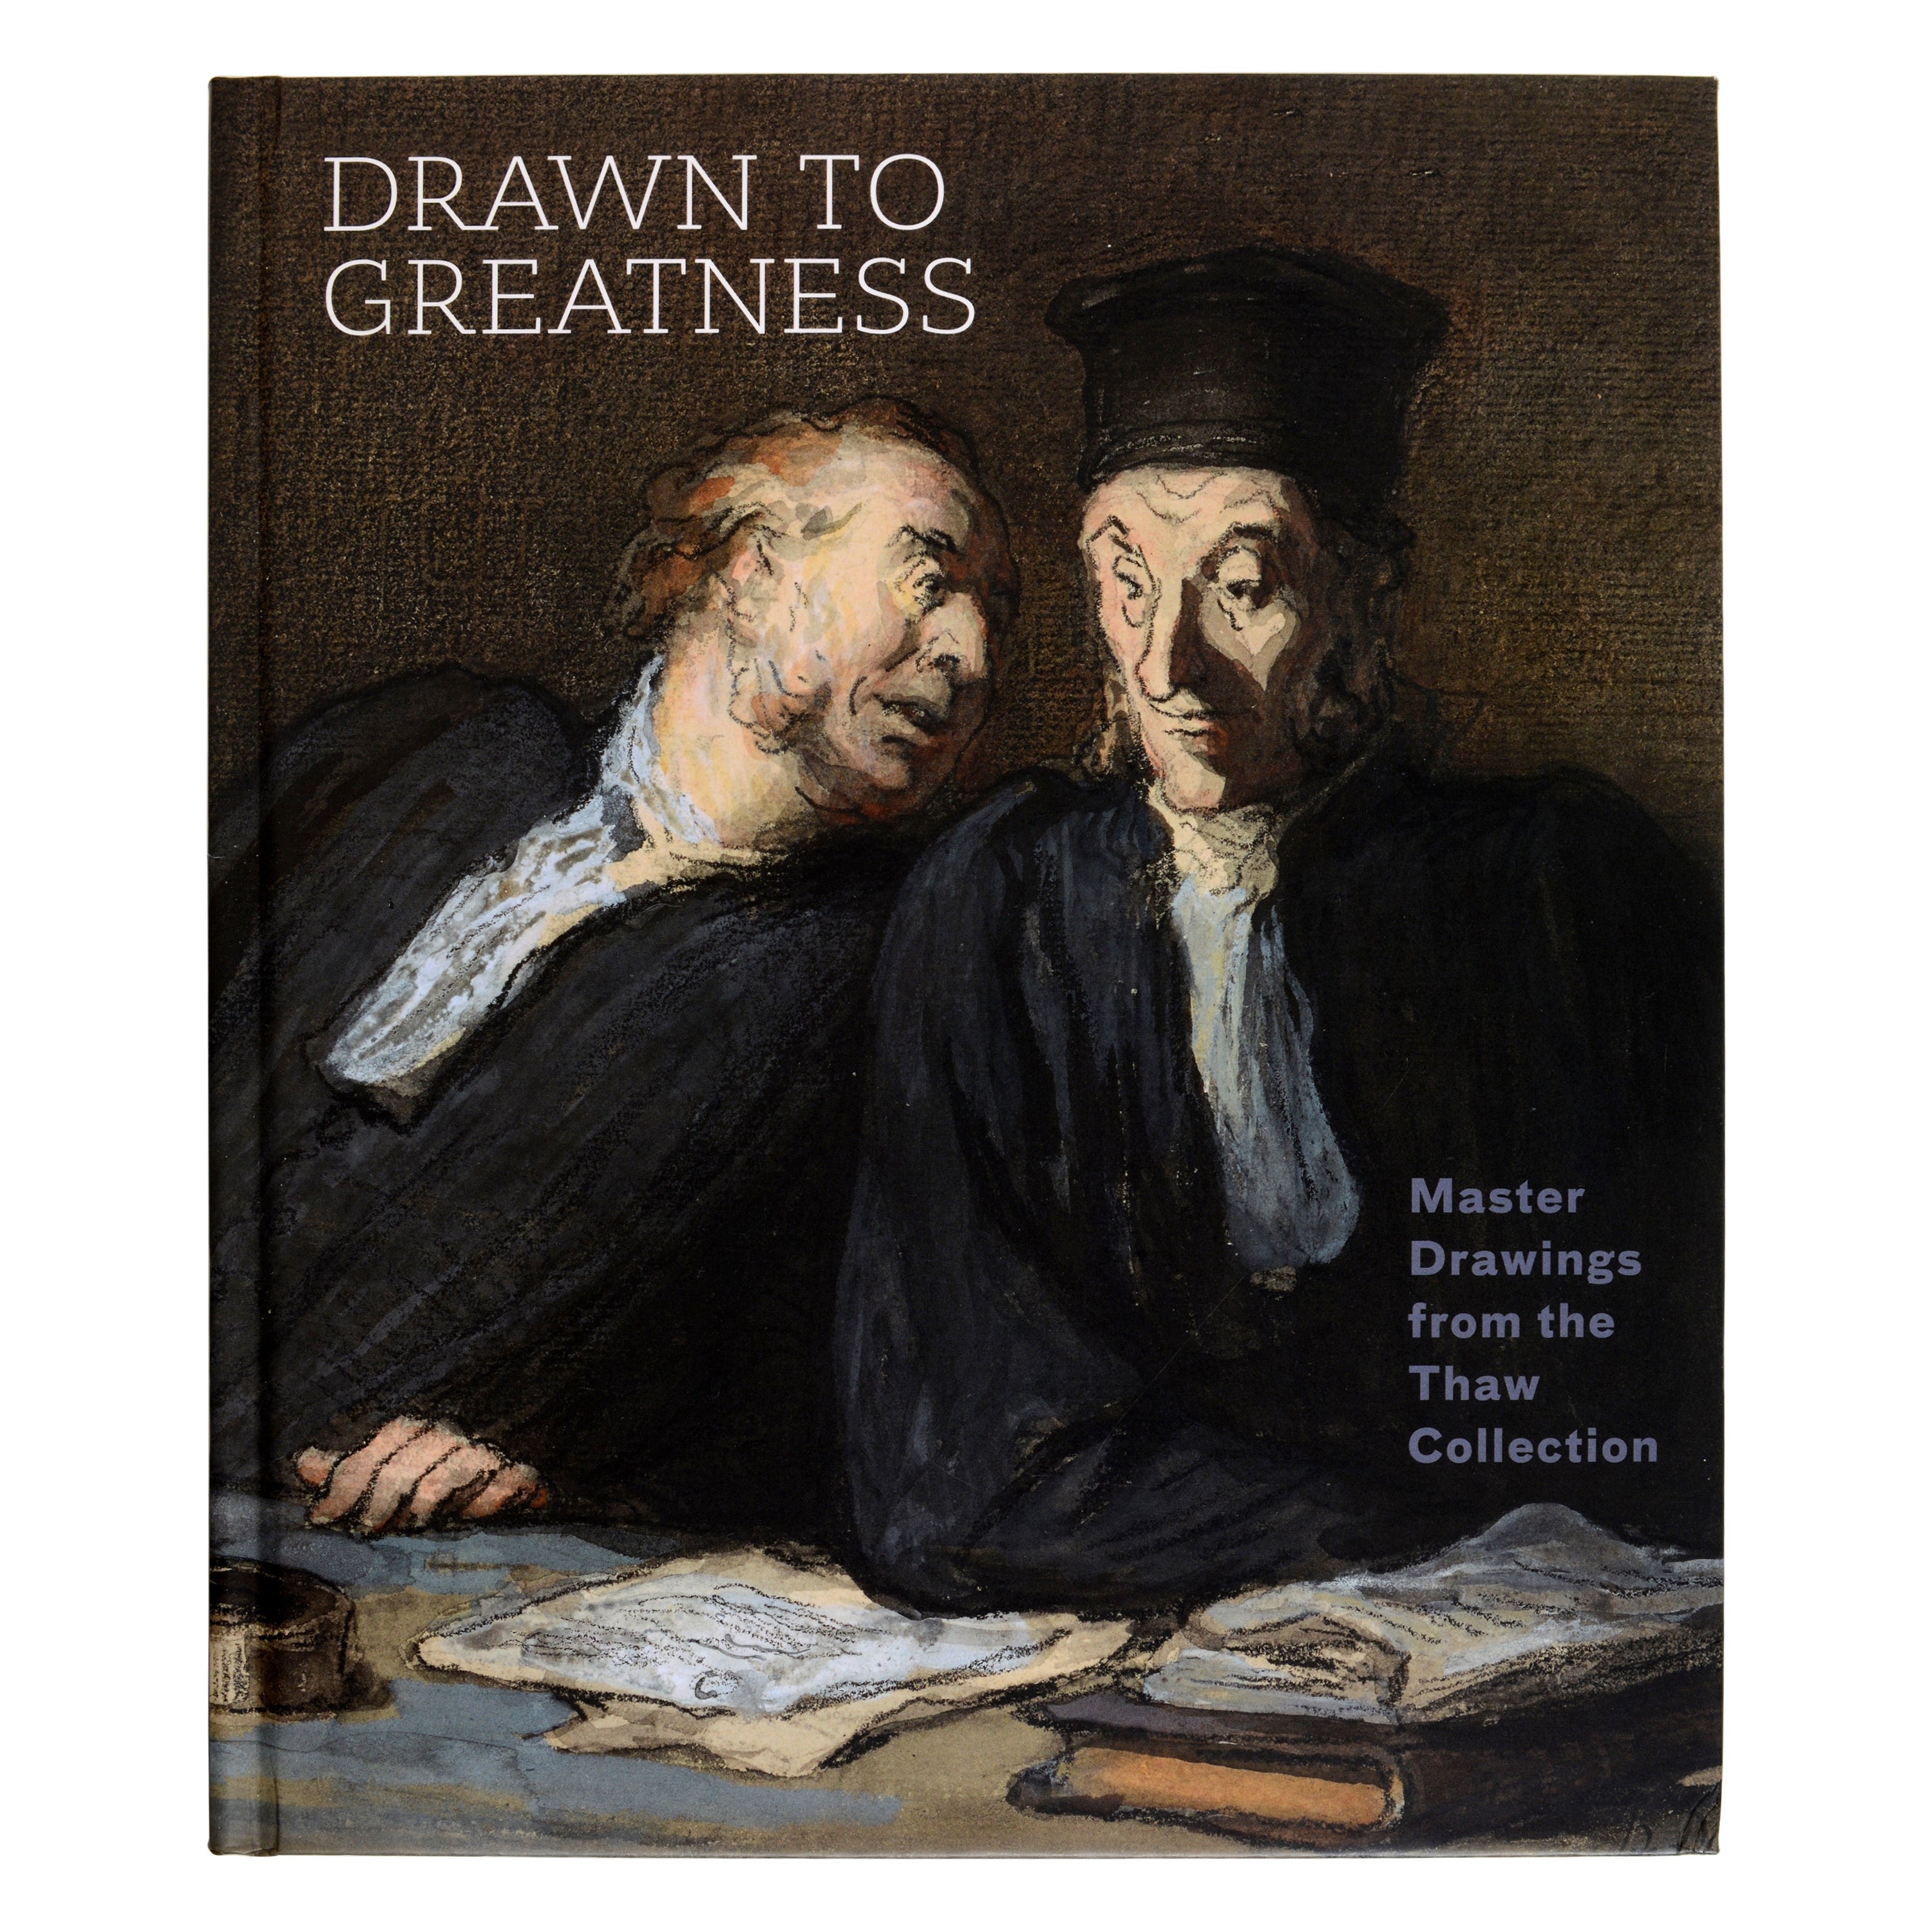 Drawn to Greatness: Master Drawings from the Thaw Collection de Pierpont Morgan